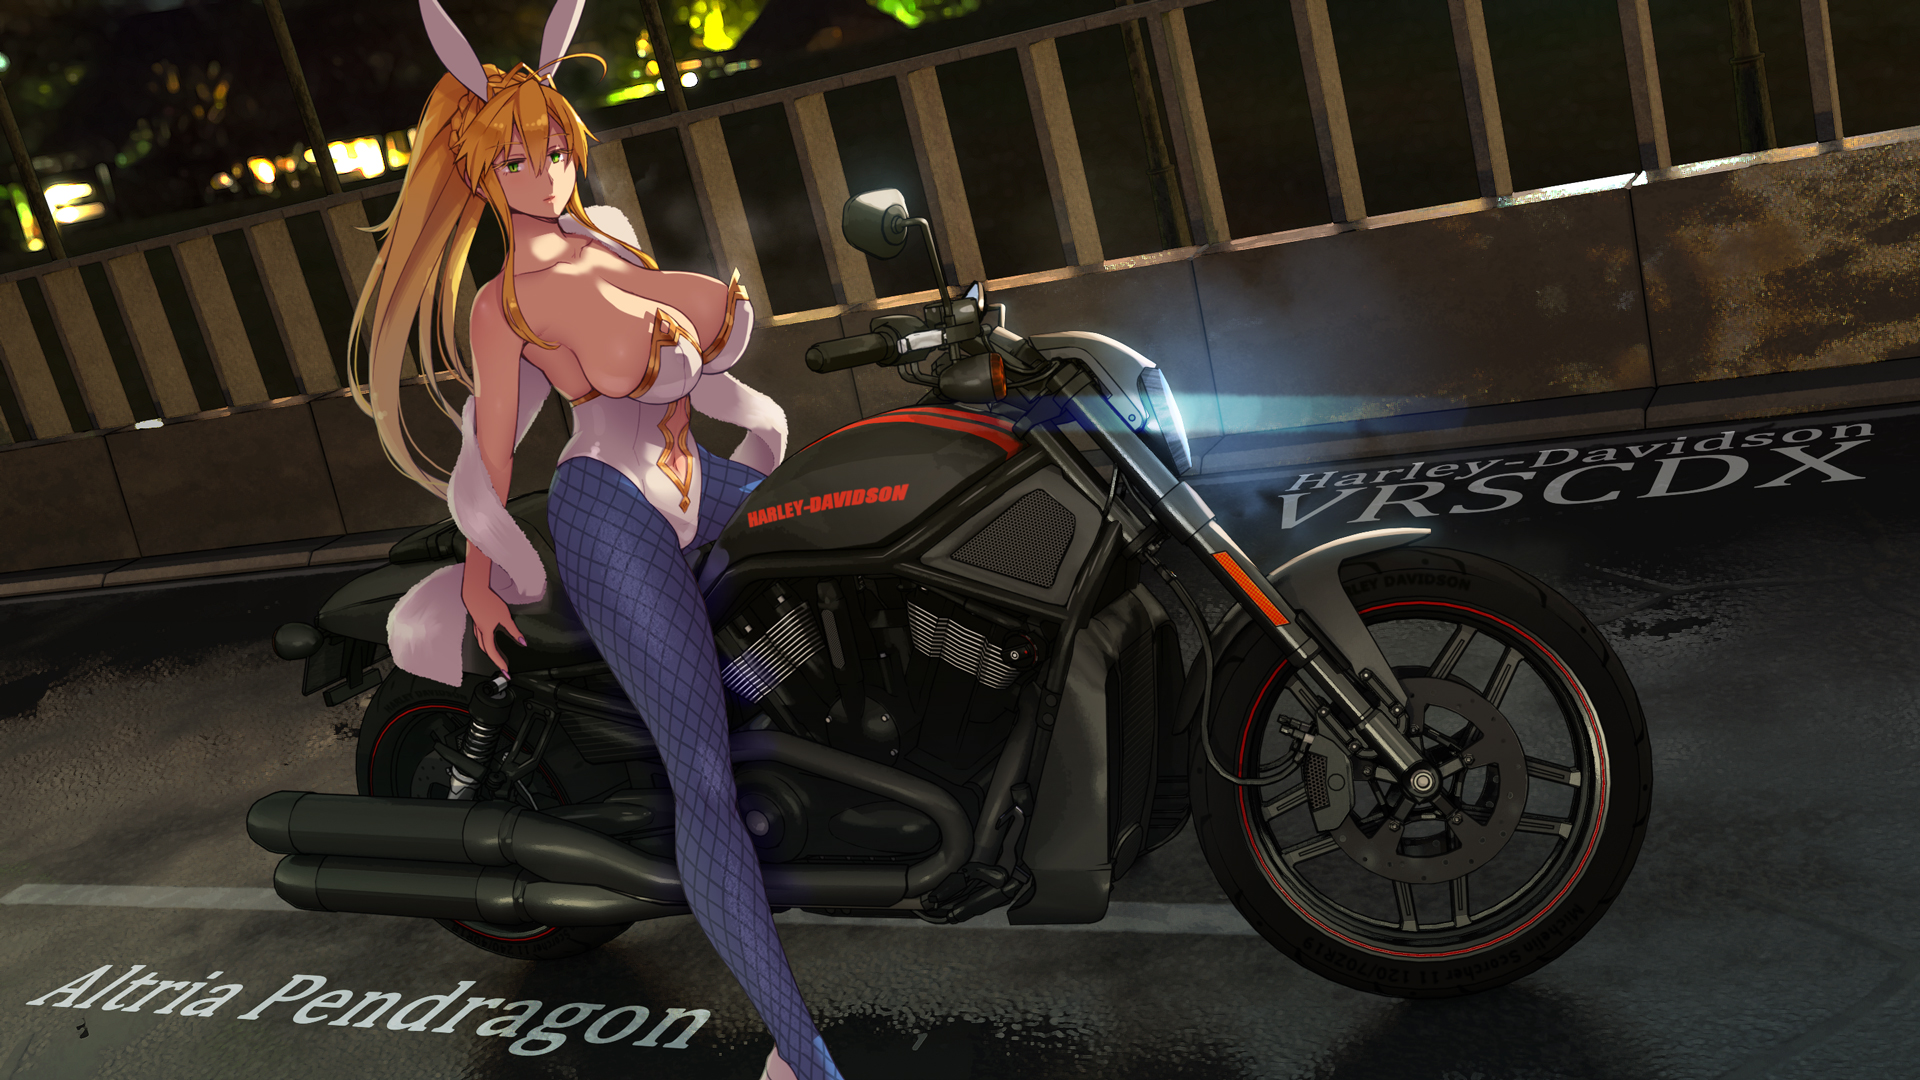 Anime 1920x1080 anime anime girls huge breasts hanging boobs low neckline bunny girl bunny suit bunny ears fishnet motorcycle Fate series Artoria Pendragon Harley-Davidson